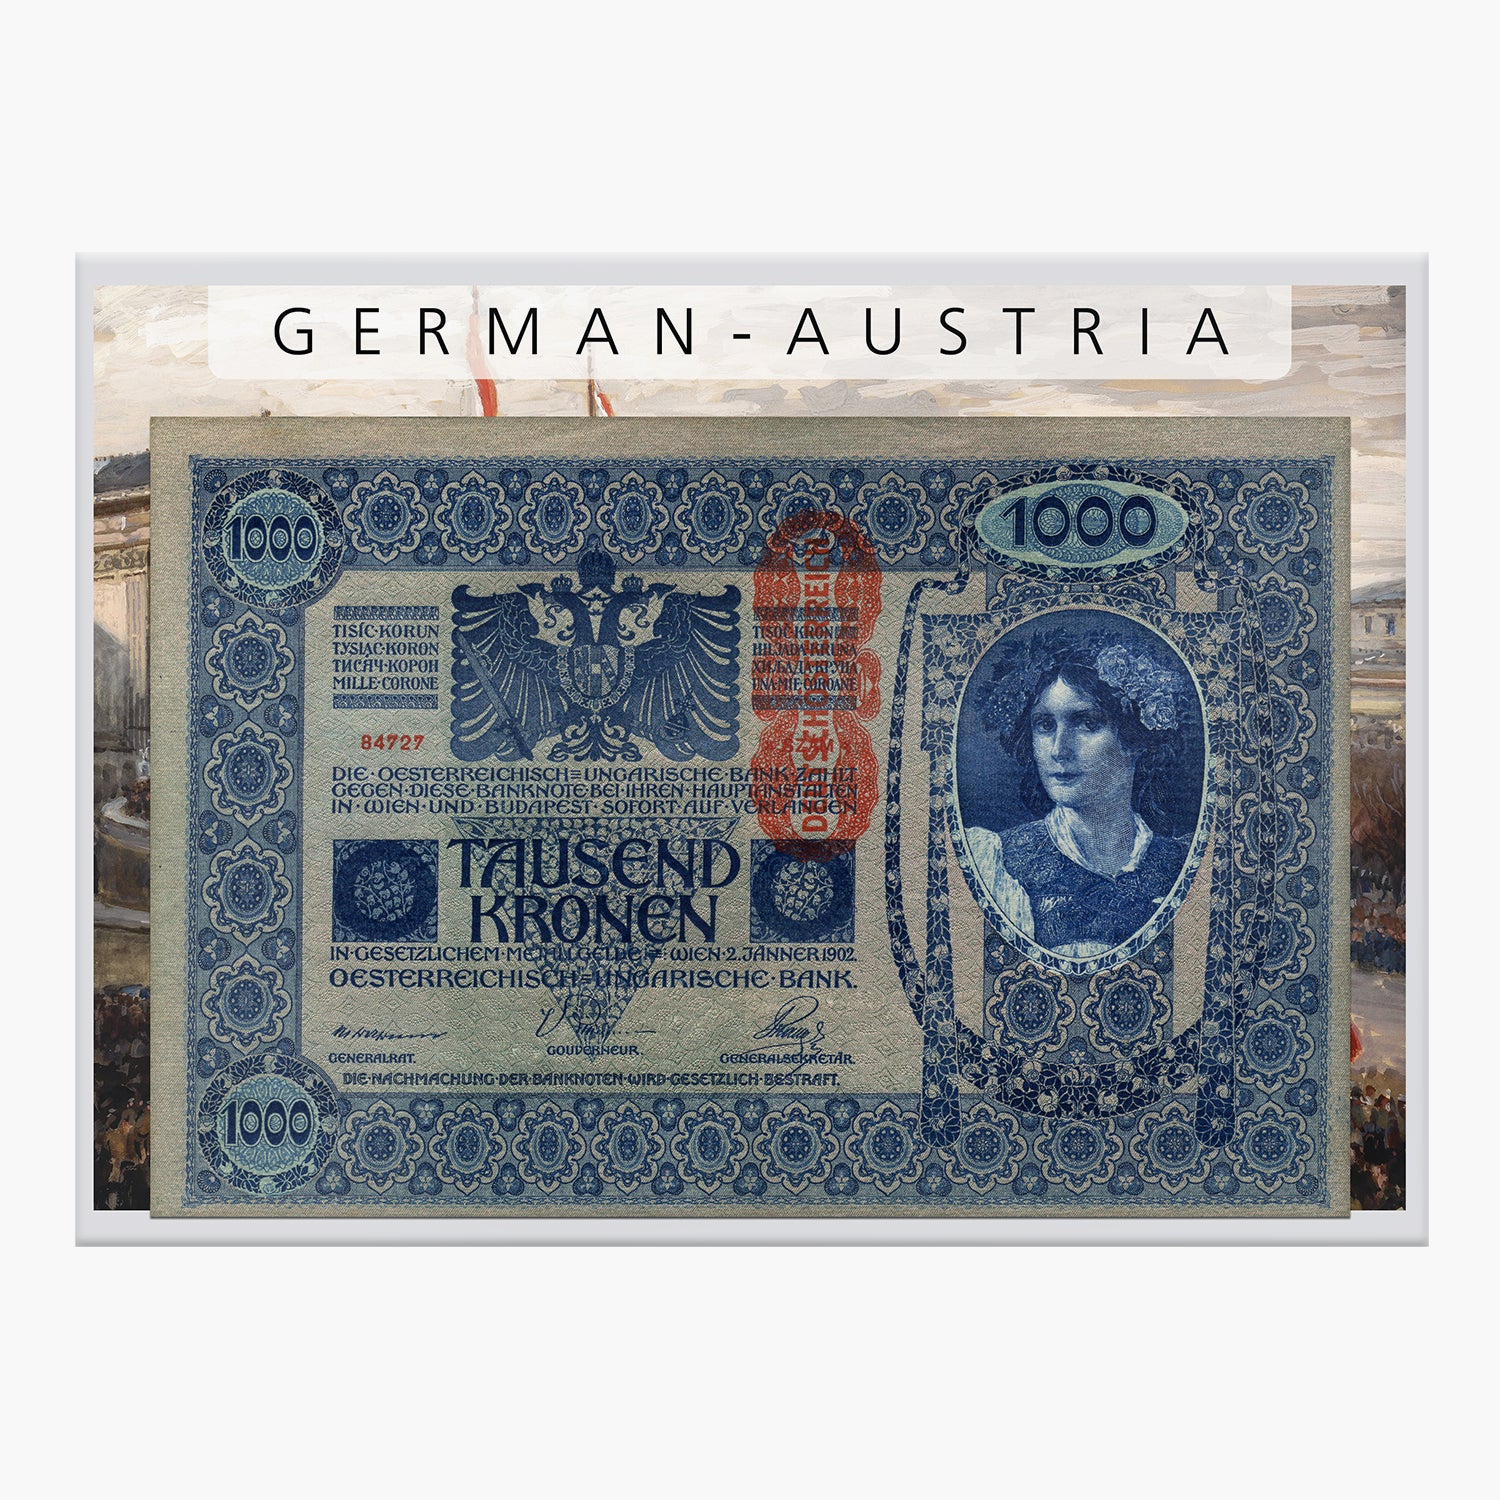 Record-breaking Banknote with 9 Languages